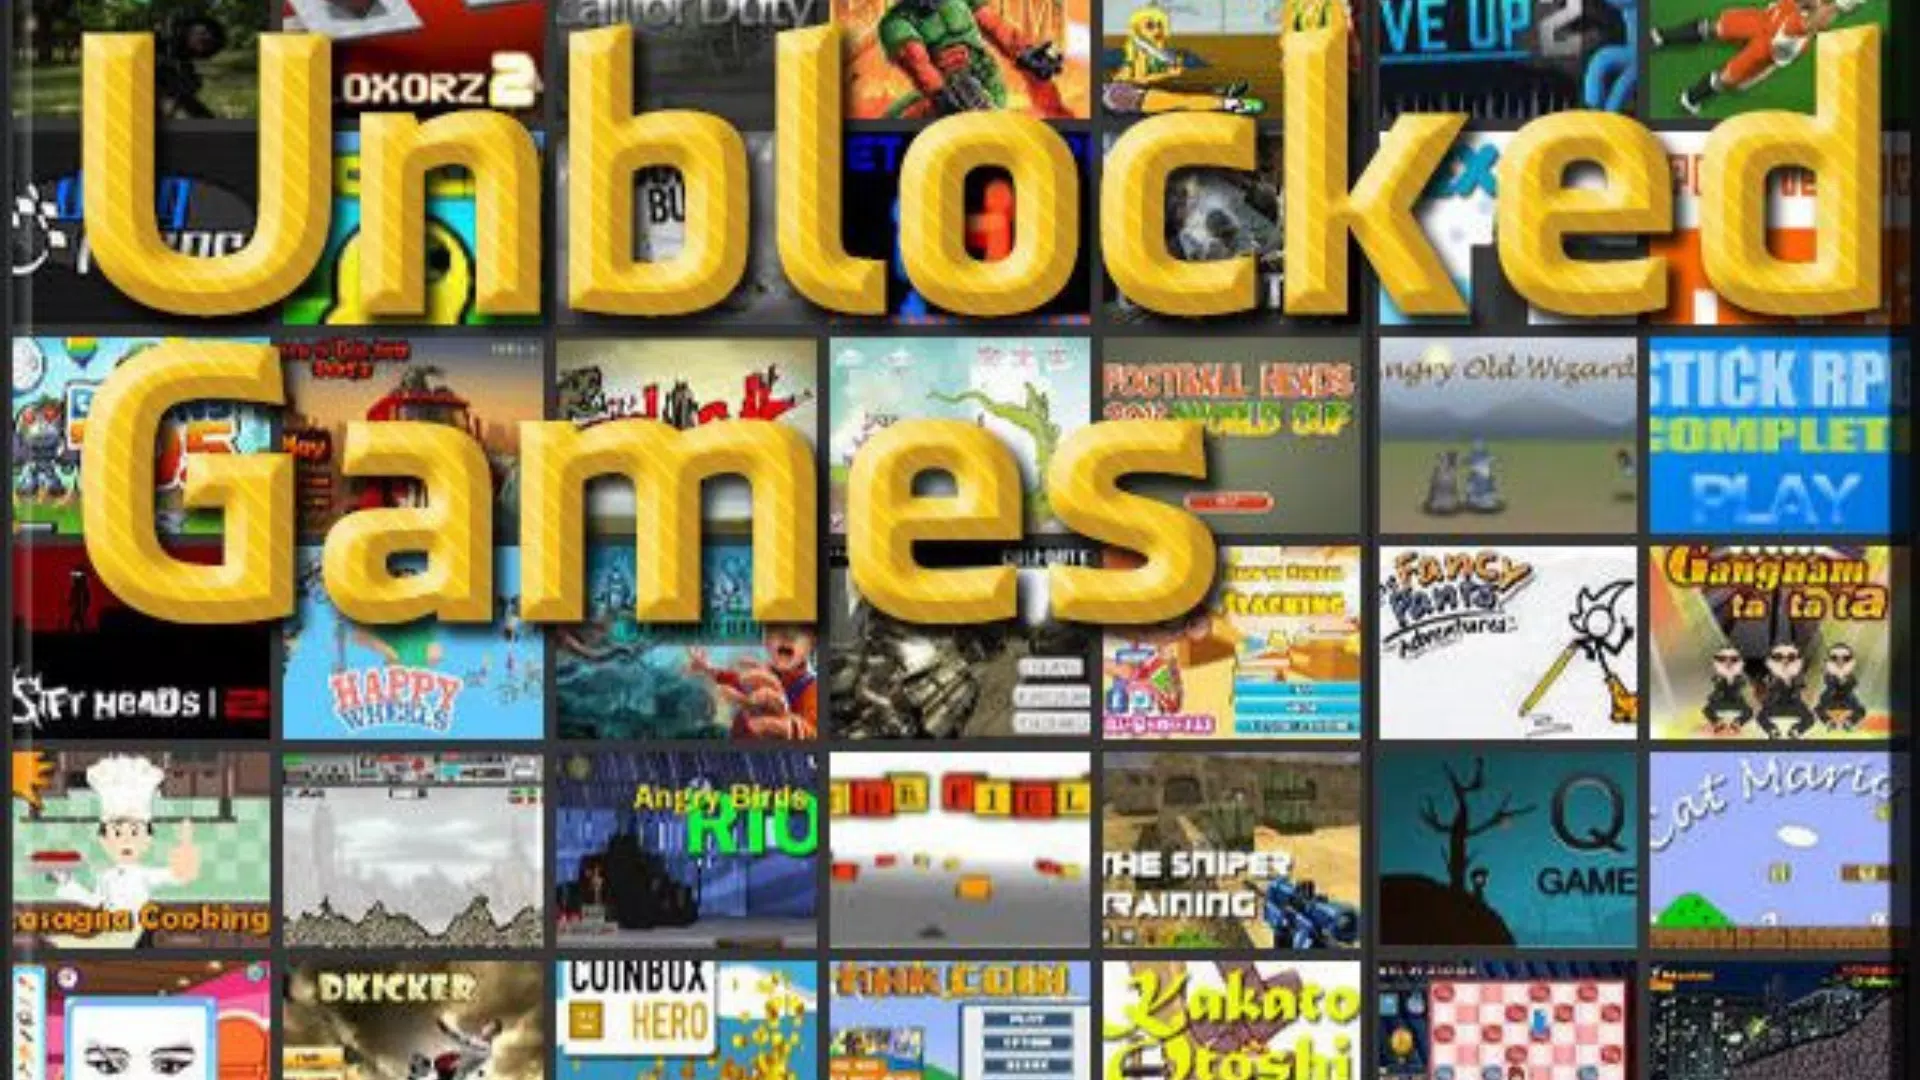 Free Games Unblocked